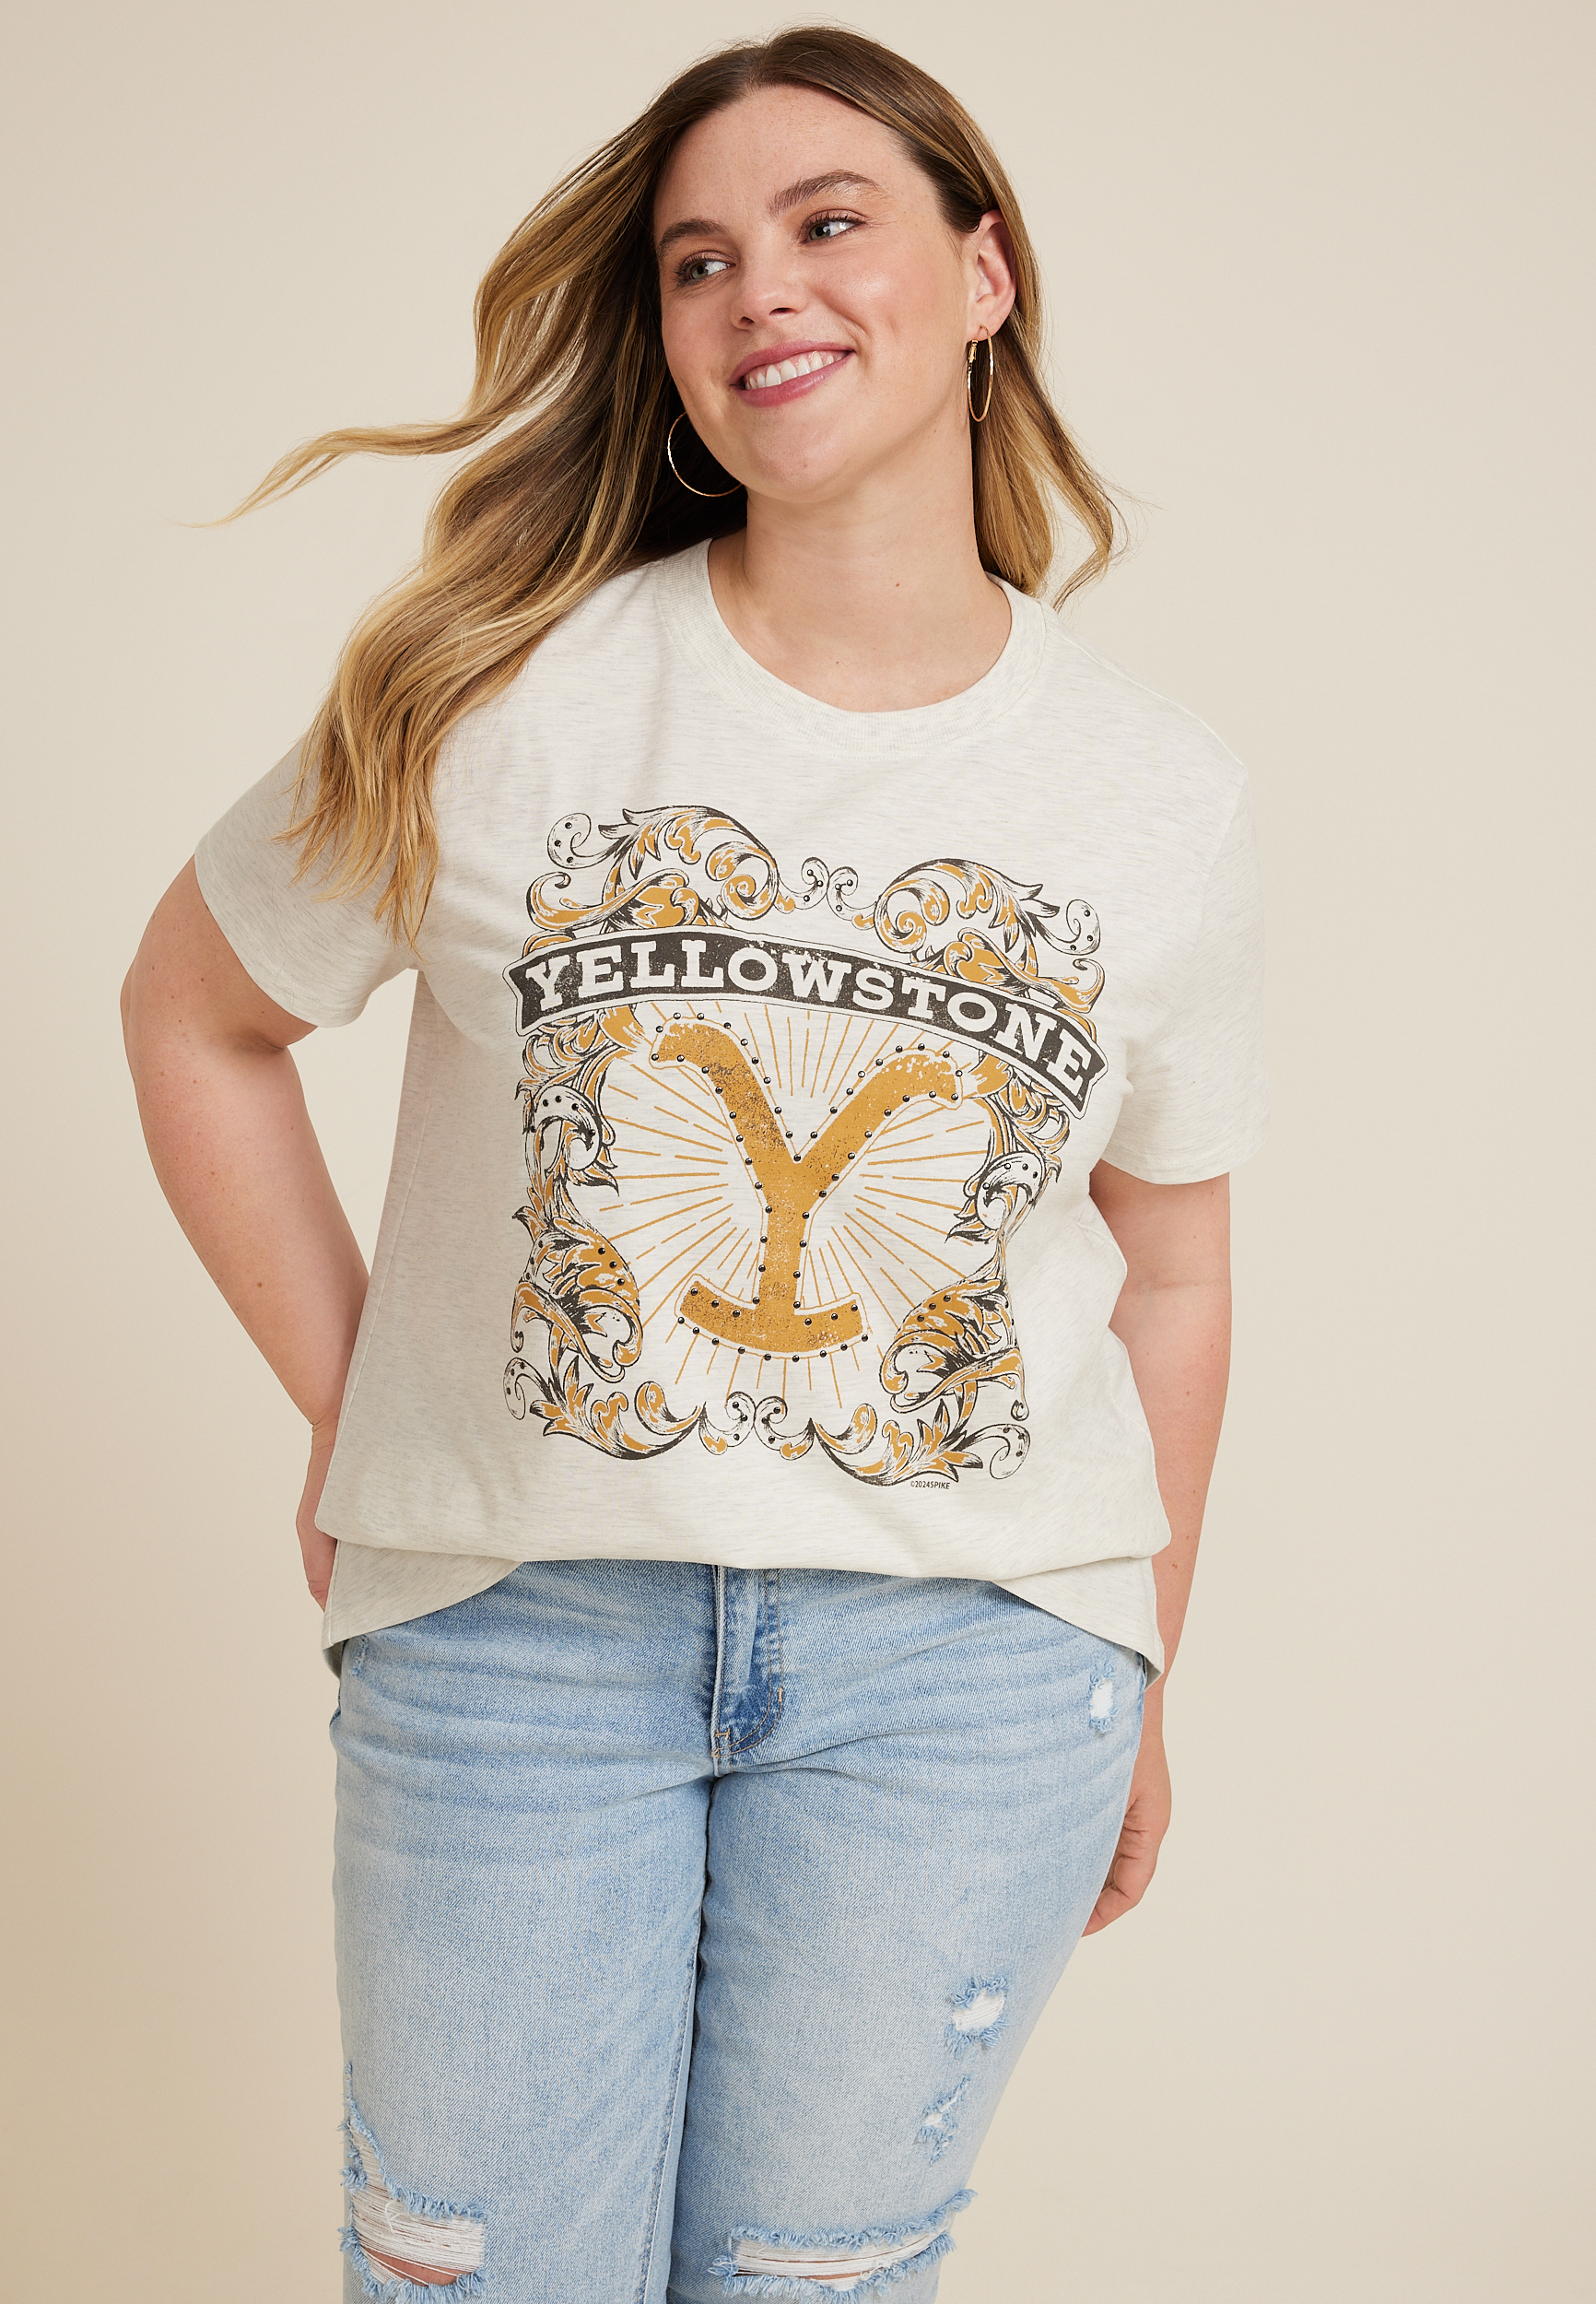 Plus Yellowstone Oversized Fit Graphic Tee